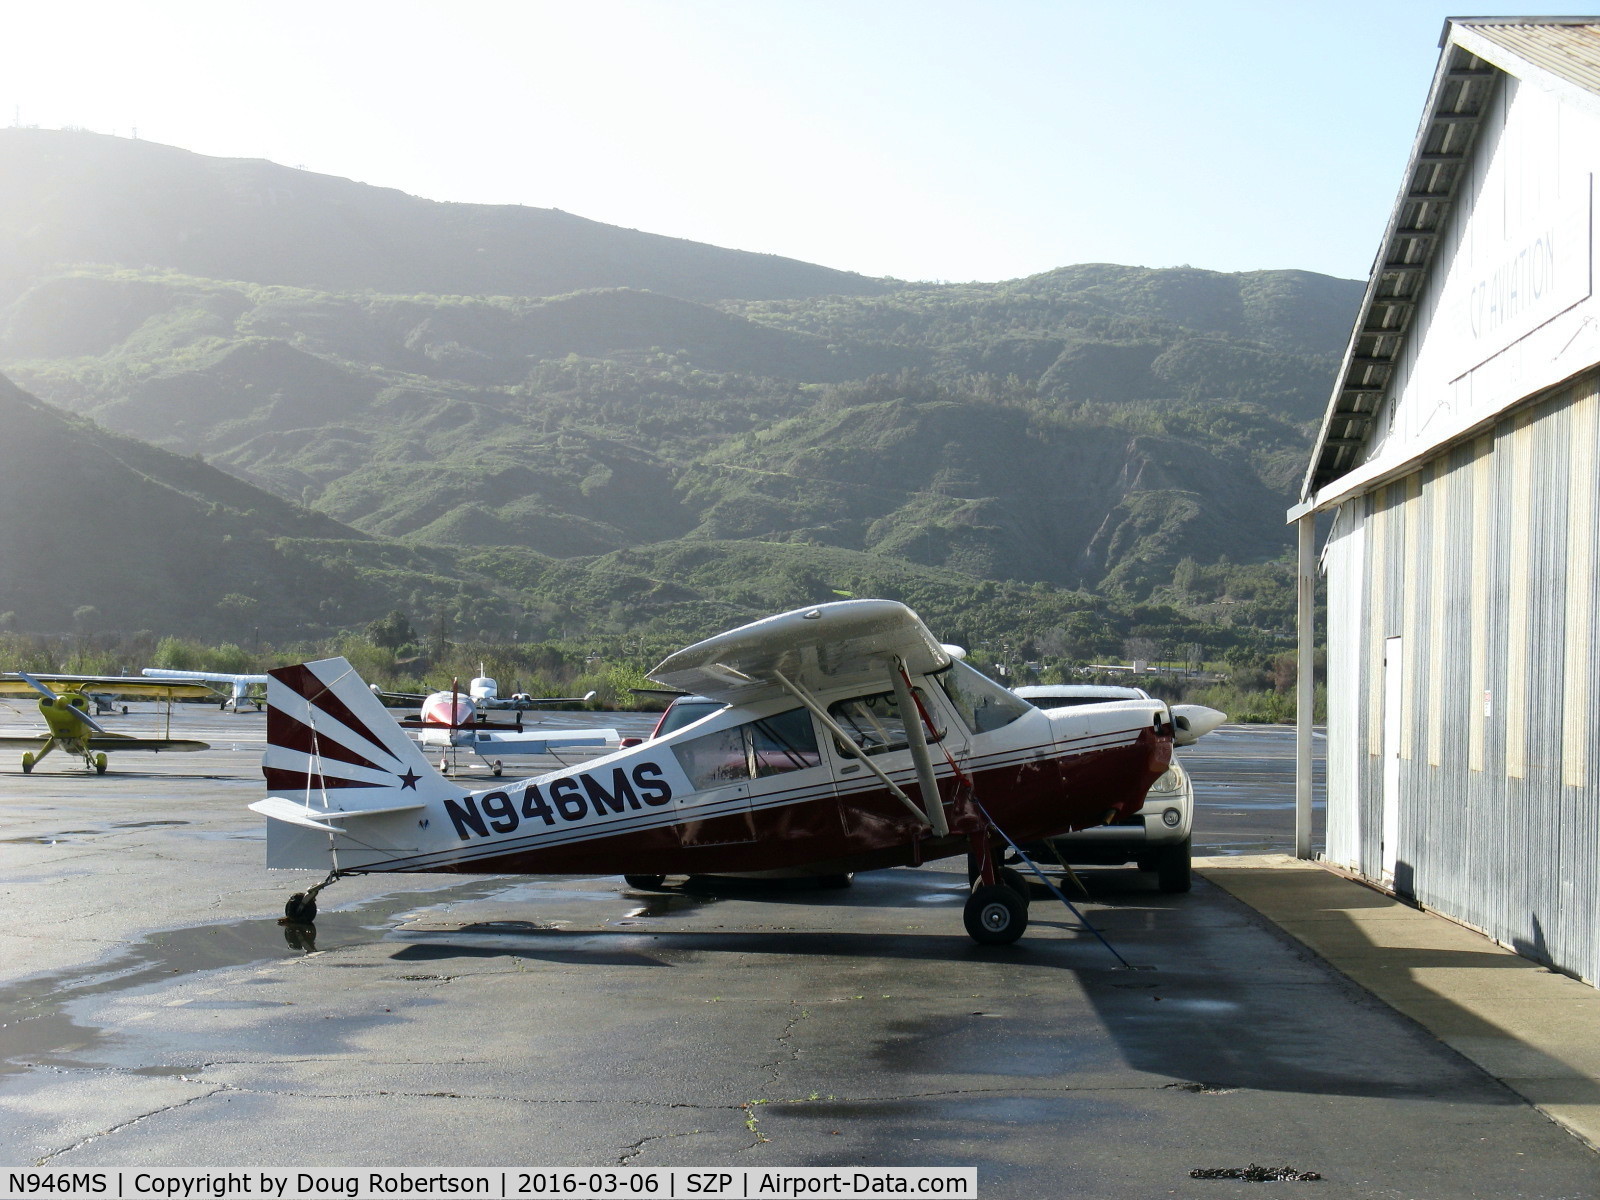 N946MS, 2015 American Champion 7ECA Aurora Citabria C/N 1411-2015, 2015 American Champion 7ECA AURORA, Lycoming O-235-K2C 118 Hp, 2,400 Hrs TBO, Model debut-1995, 36 gallons, rated +5, -2gs, well equipped